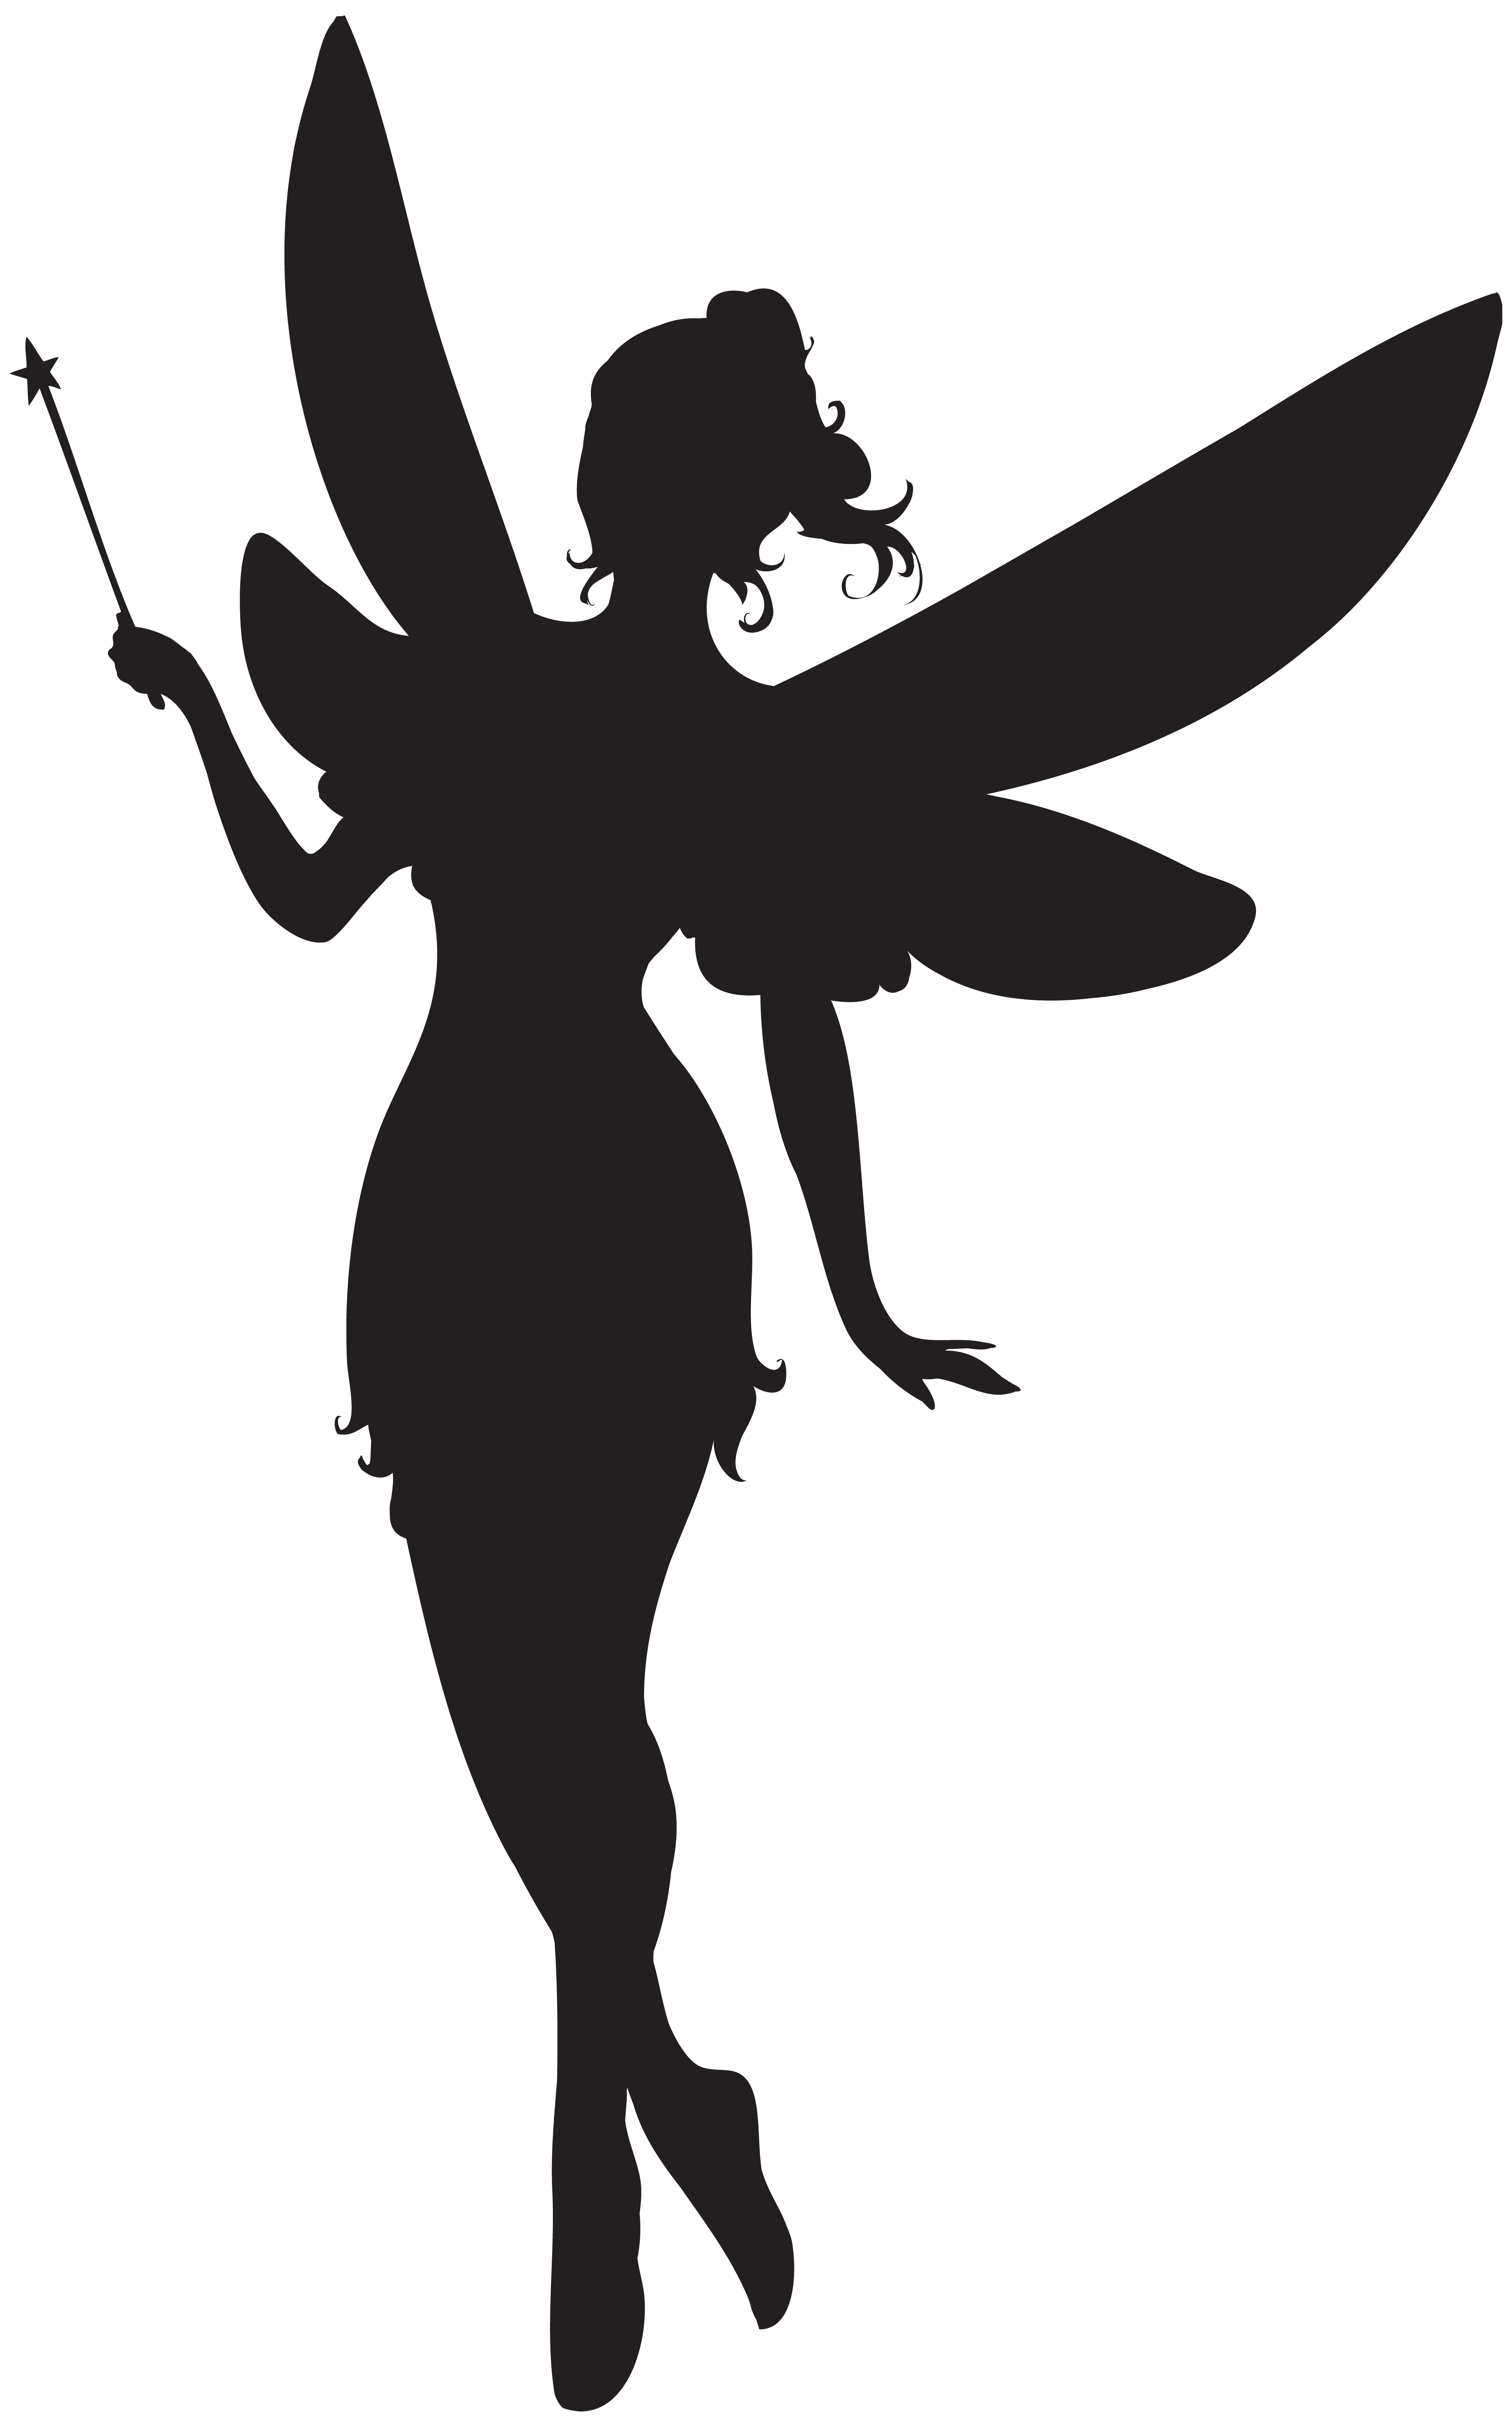 Fairy Silhouette Clip Art Fairy With Magic Wand Silhouette Png Clip